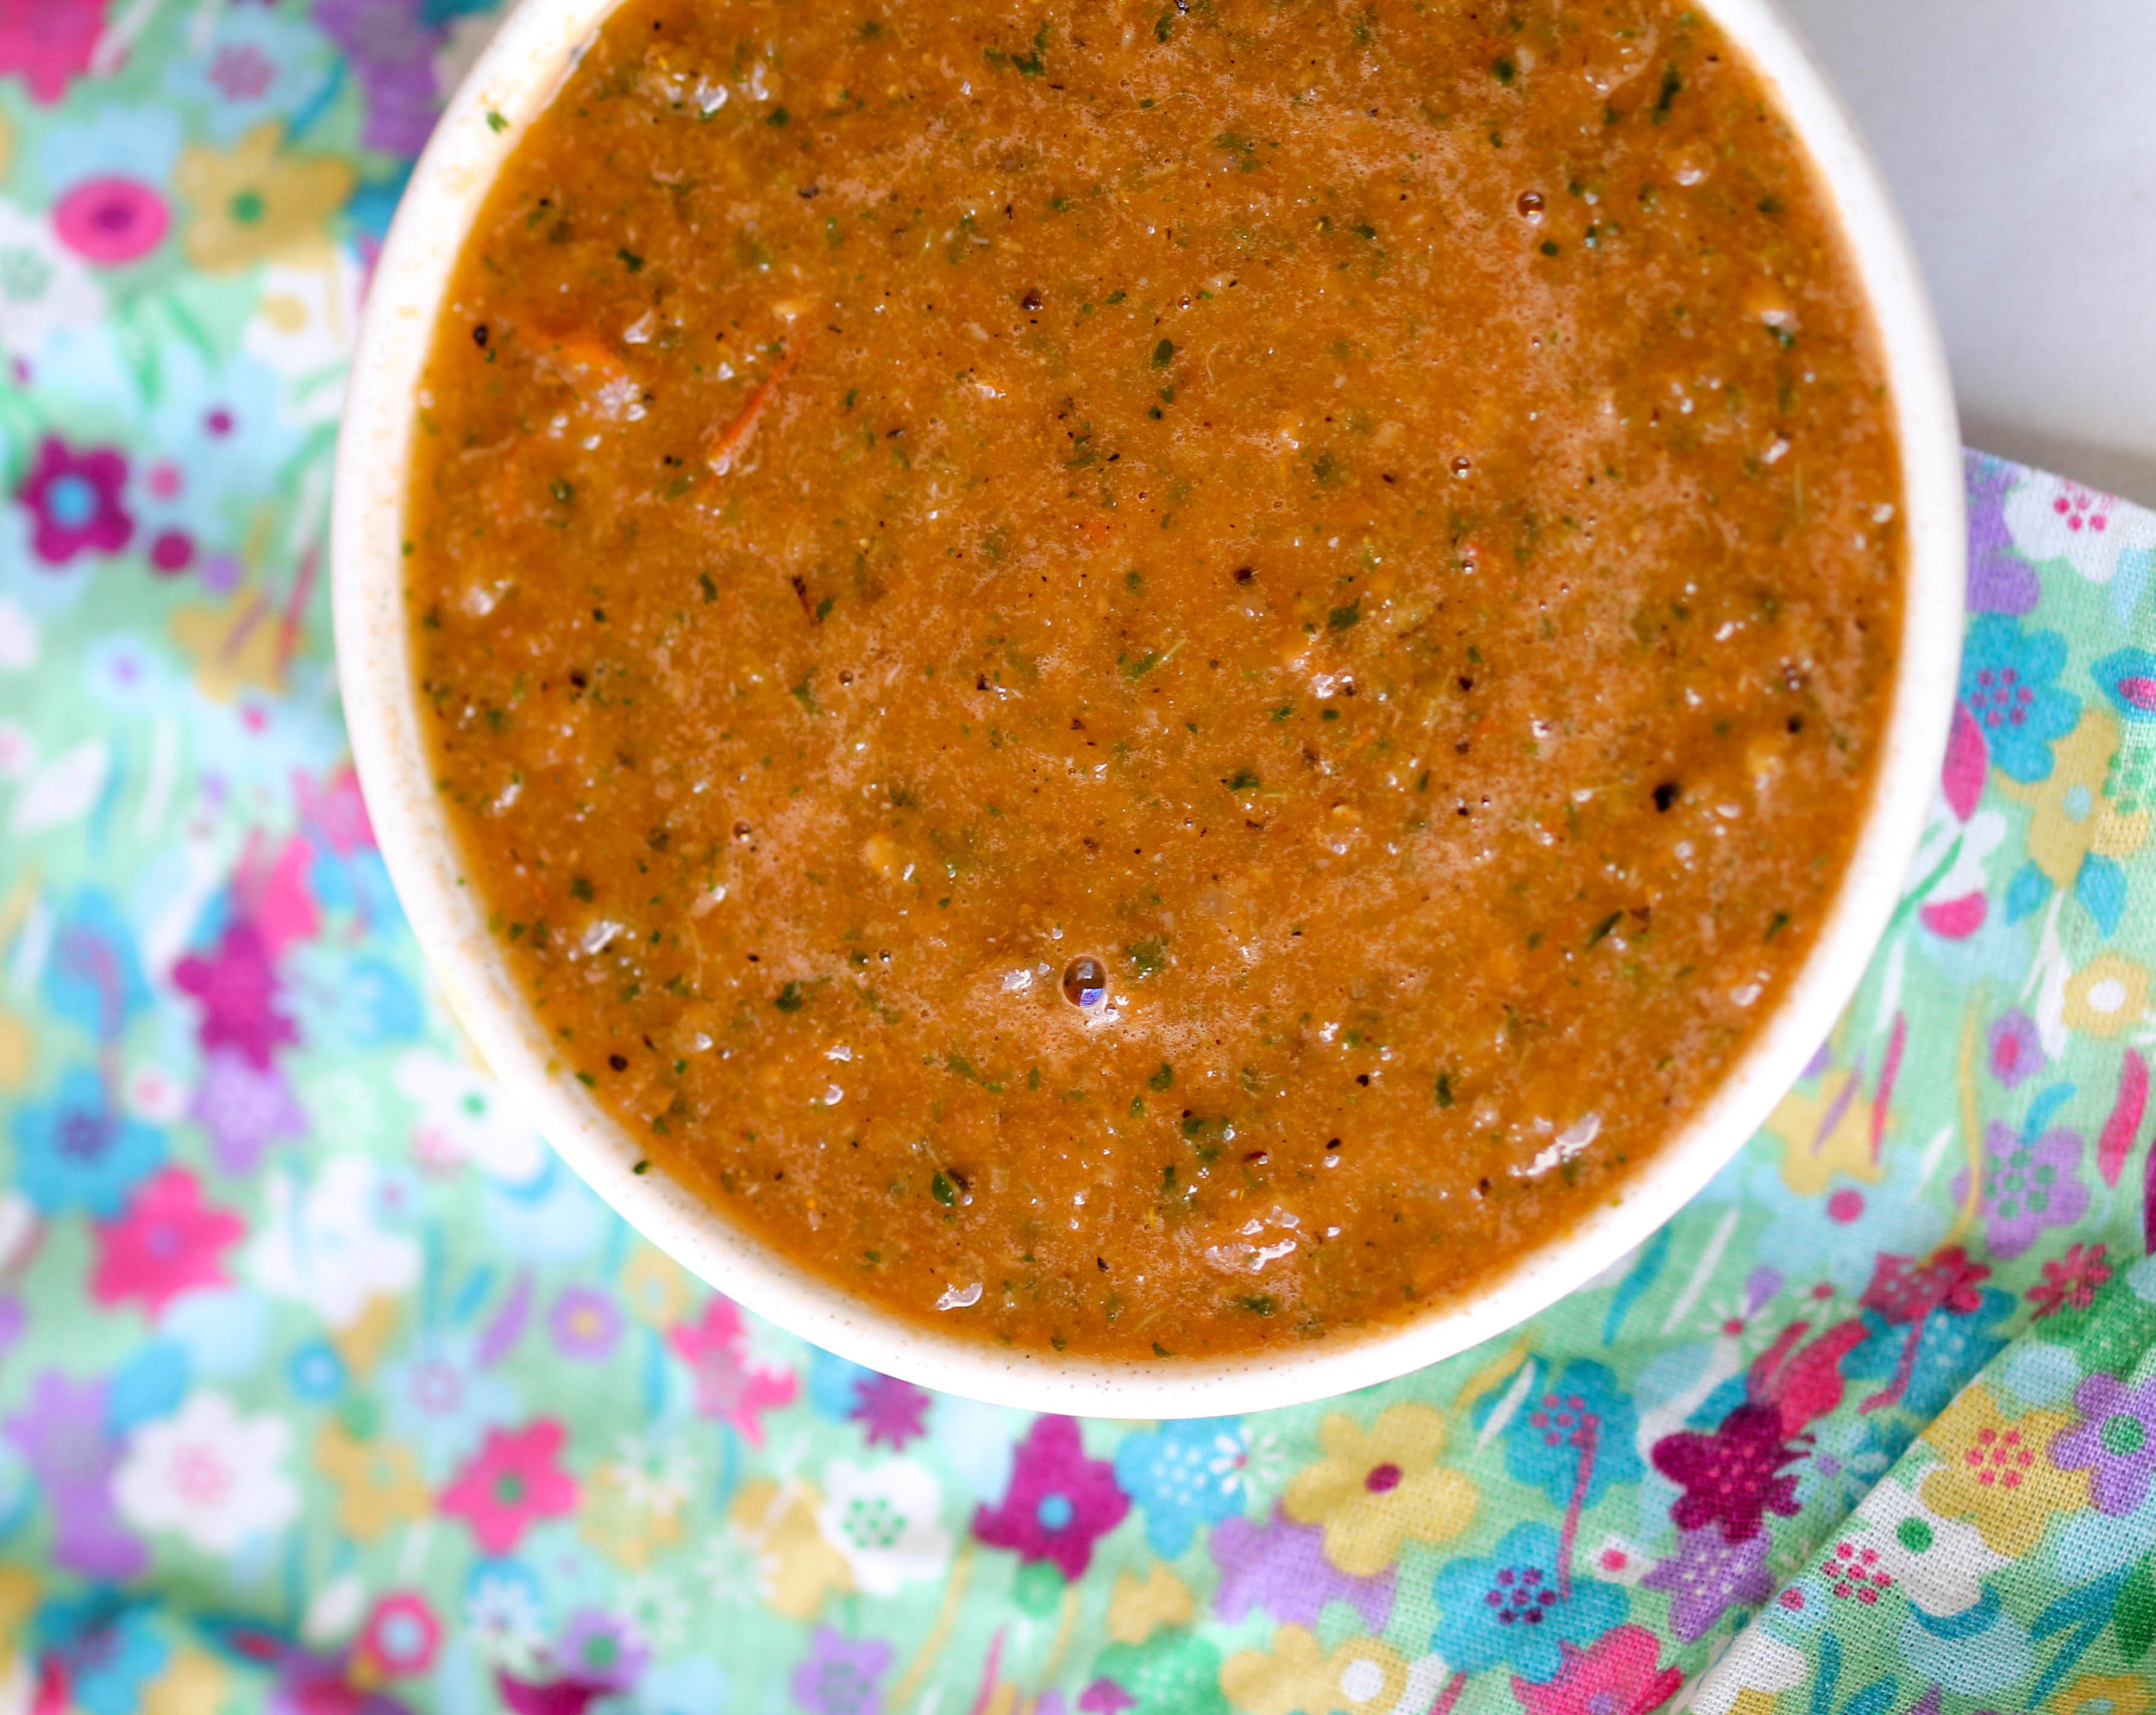 Make a batch of spicy, flavorful "All Purpose Roasted Salsa" and use it throughout the week for salad, dips, and brunch needs. Easy customizable, naturally vegan & gluten-free!